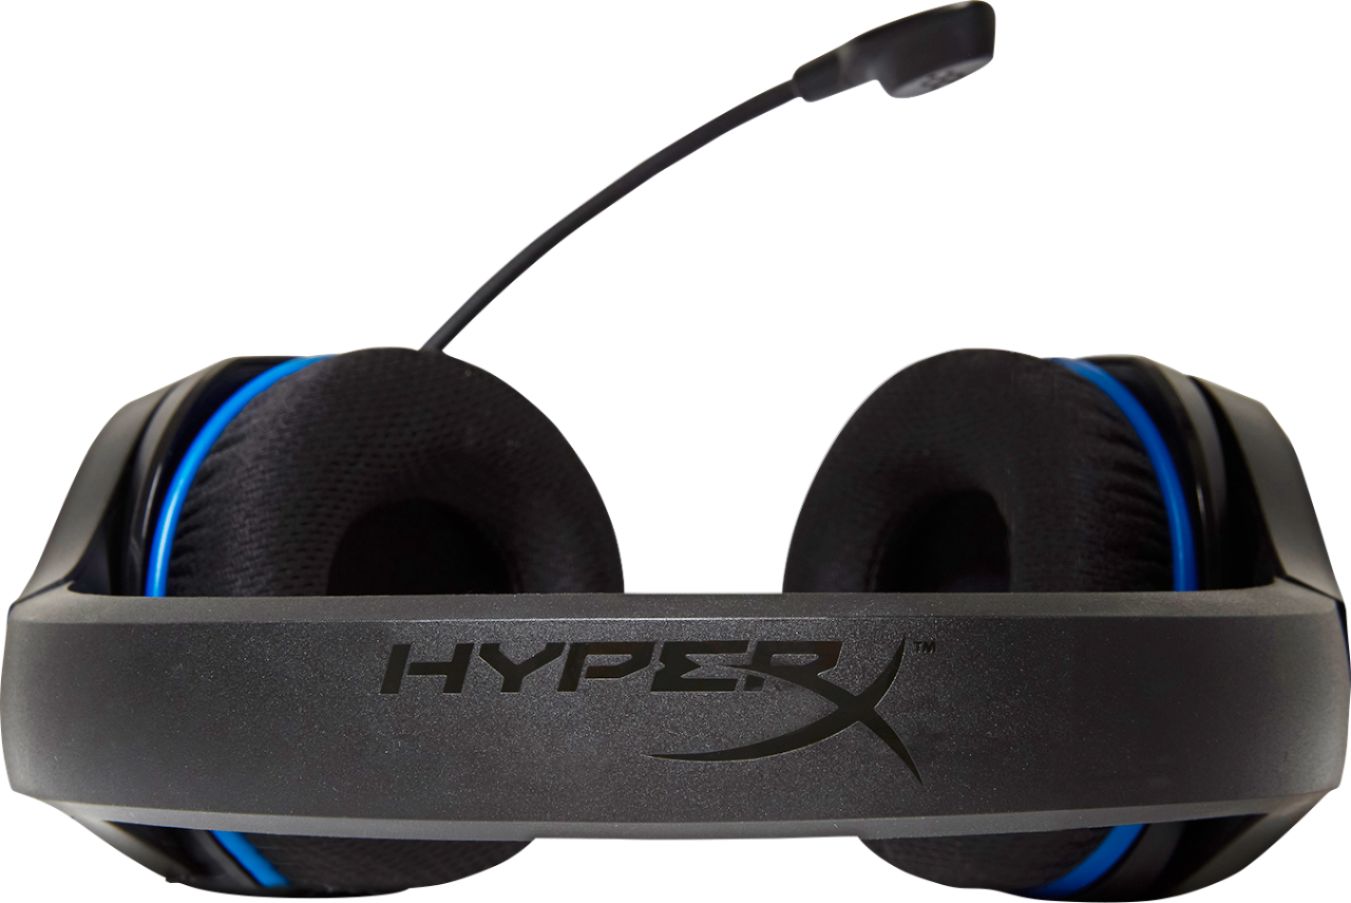 HyperX Cloud Stinger review: Basic and affordable - SoundGuys